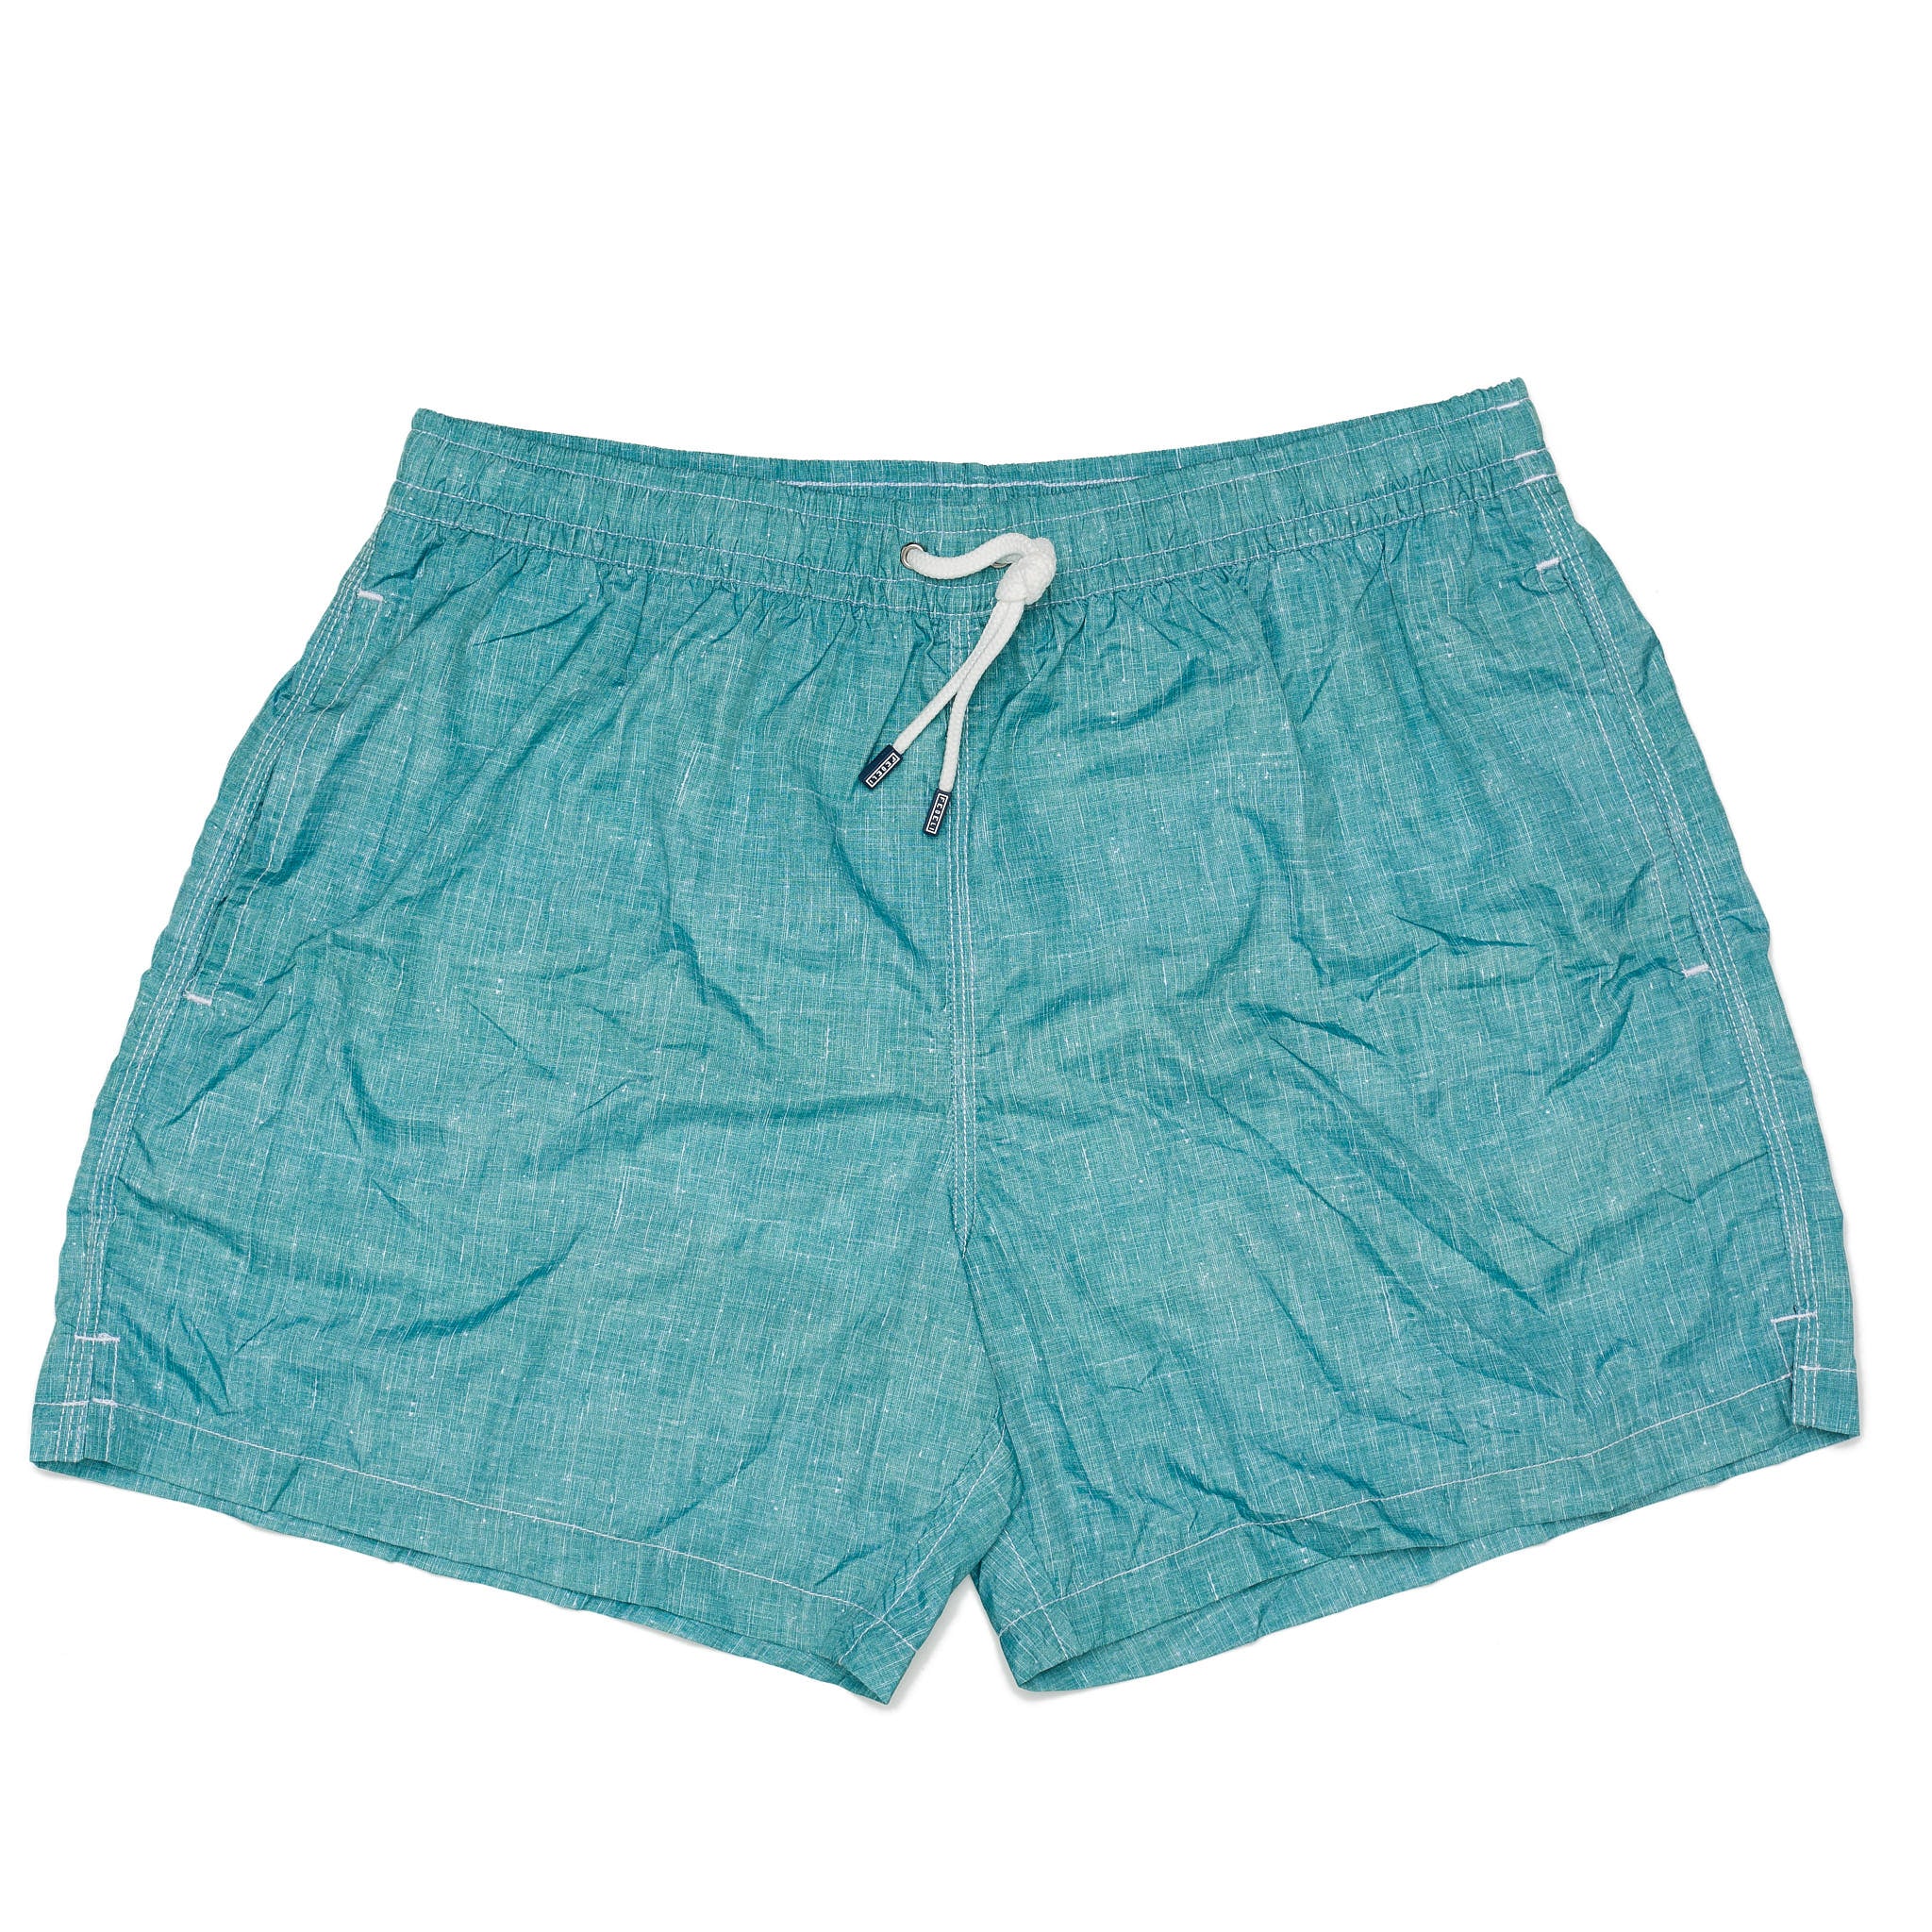 FEDELI Green Chambray Printed Madeira Airstop Swim Shorts Trunks NEW Size 3XL FEDELI